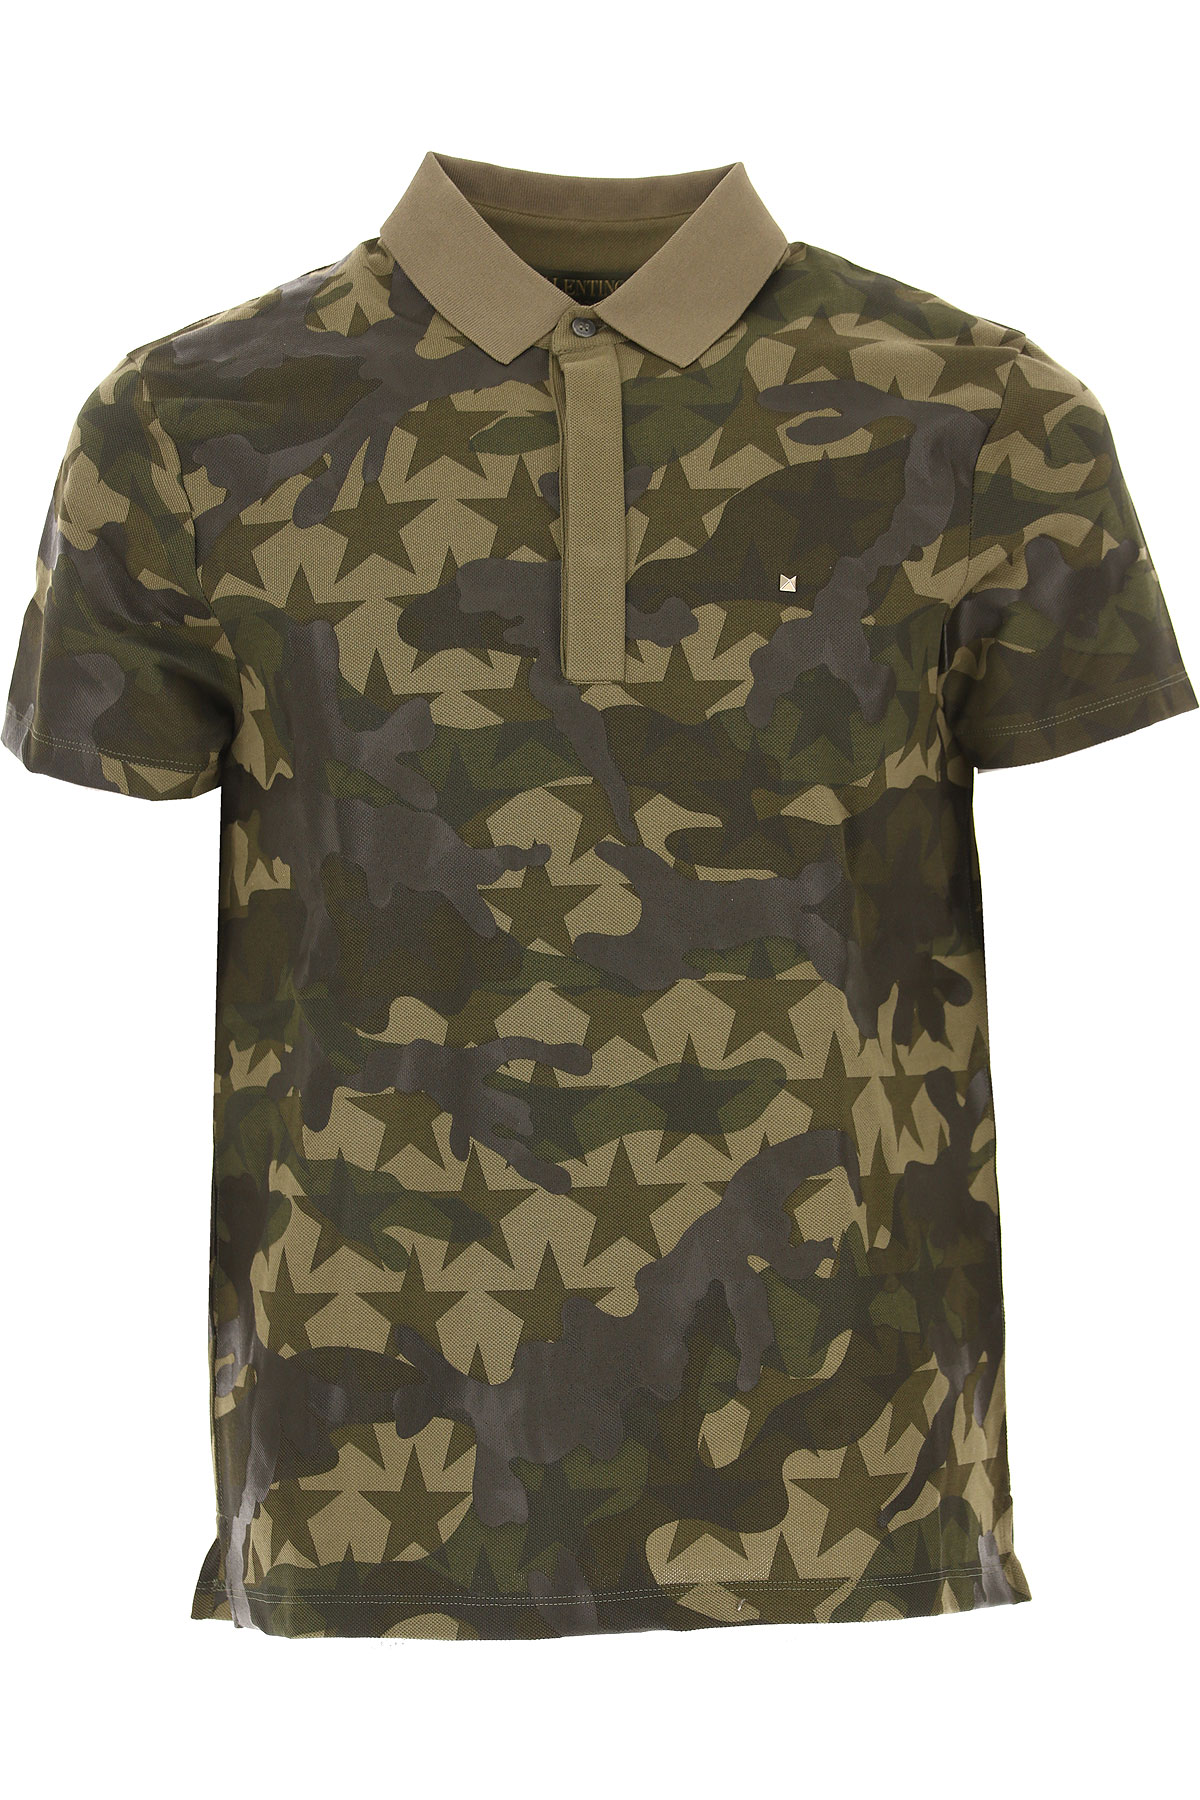 Valentino Polo Homme Outlet, Vert camouflage, Coton, 2017, S XS